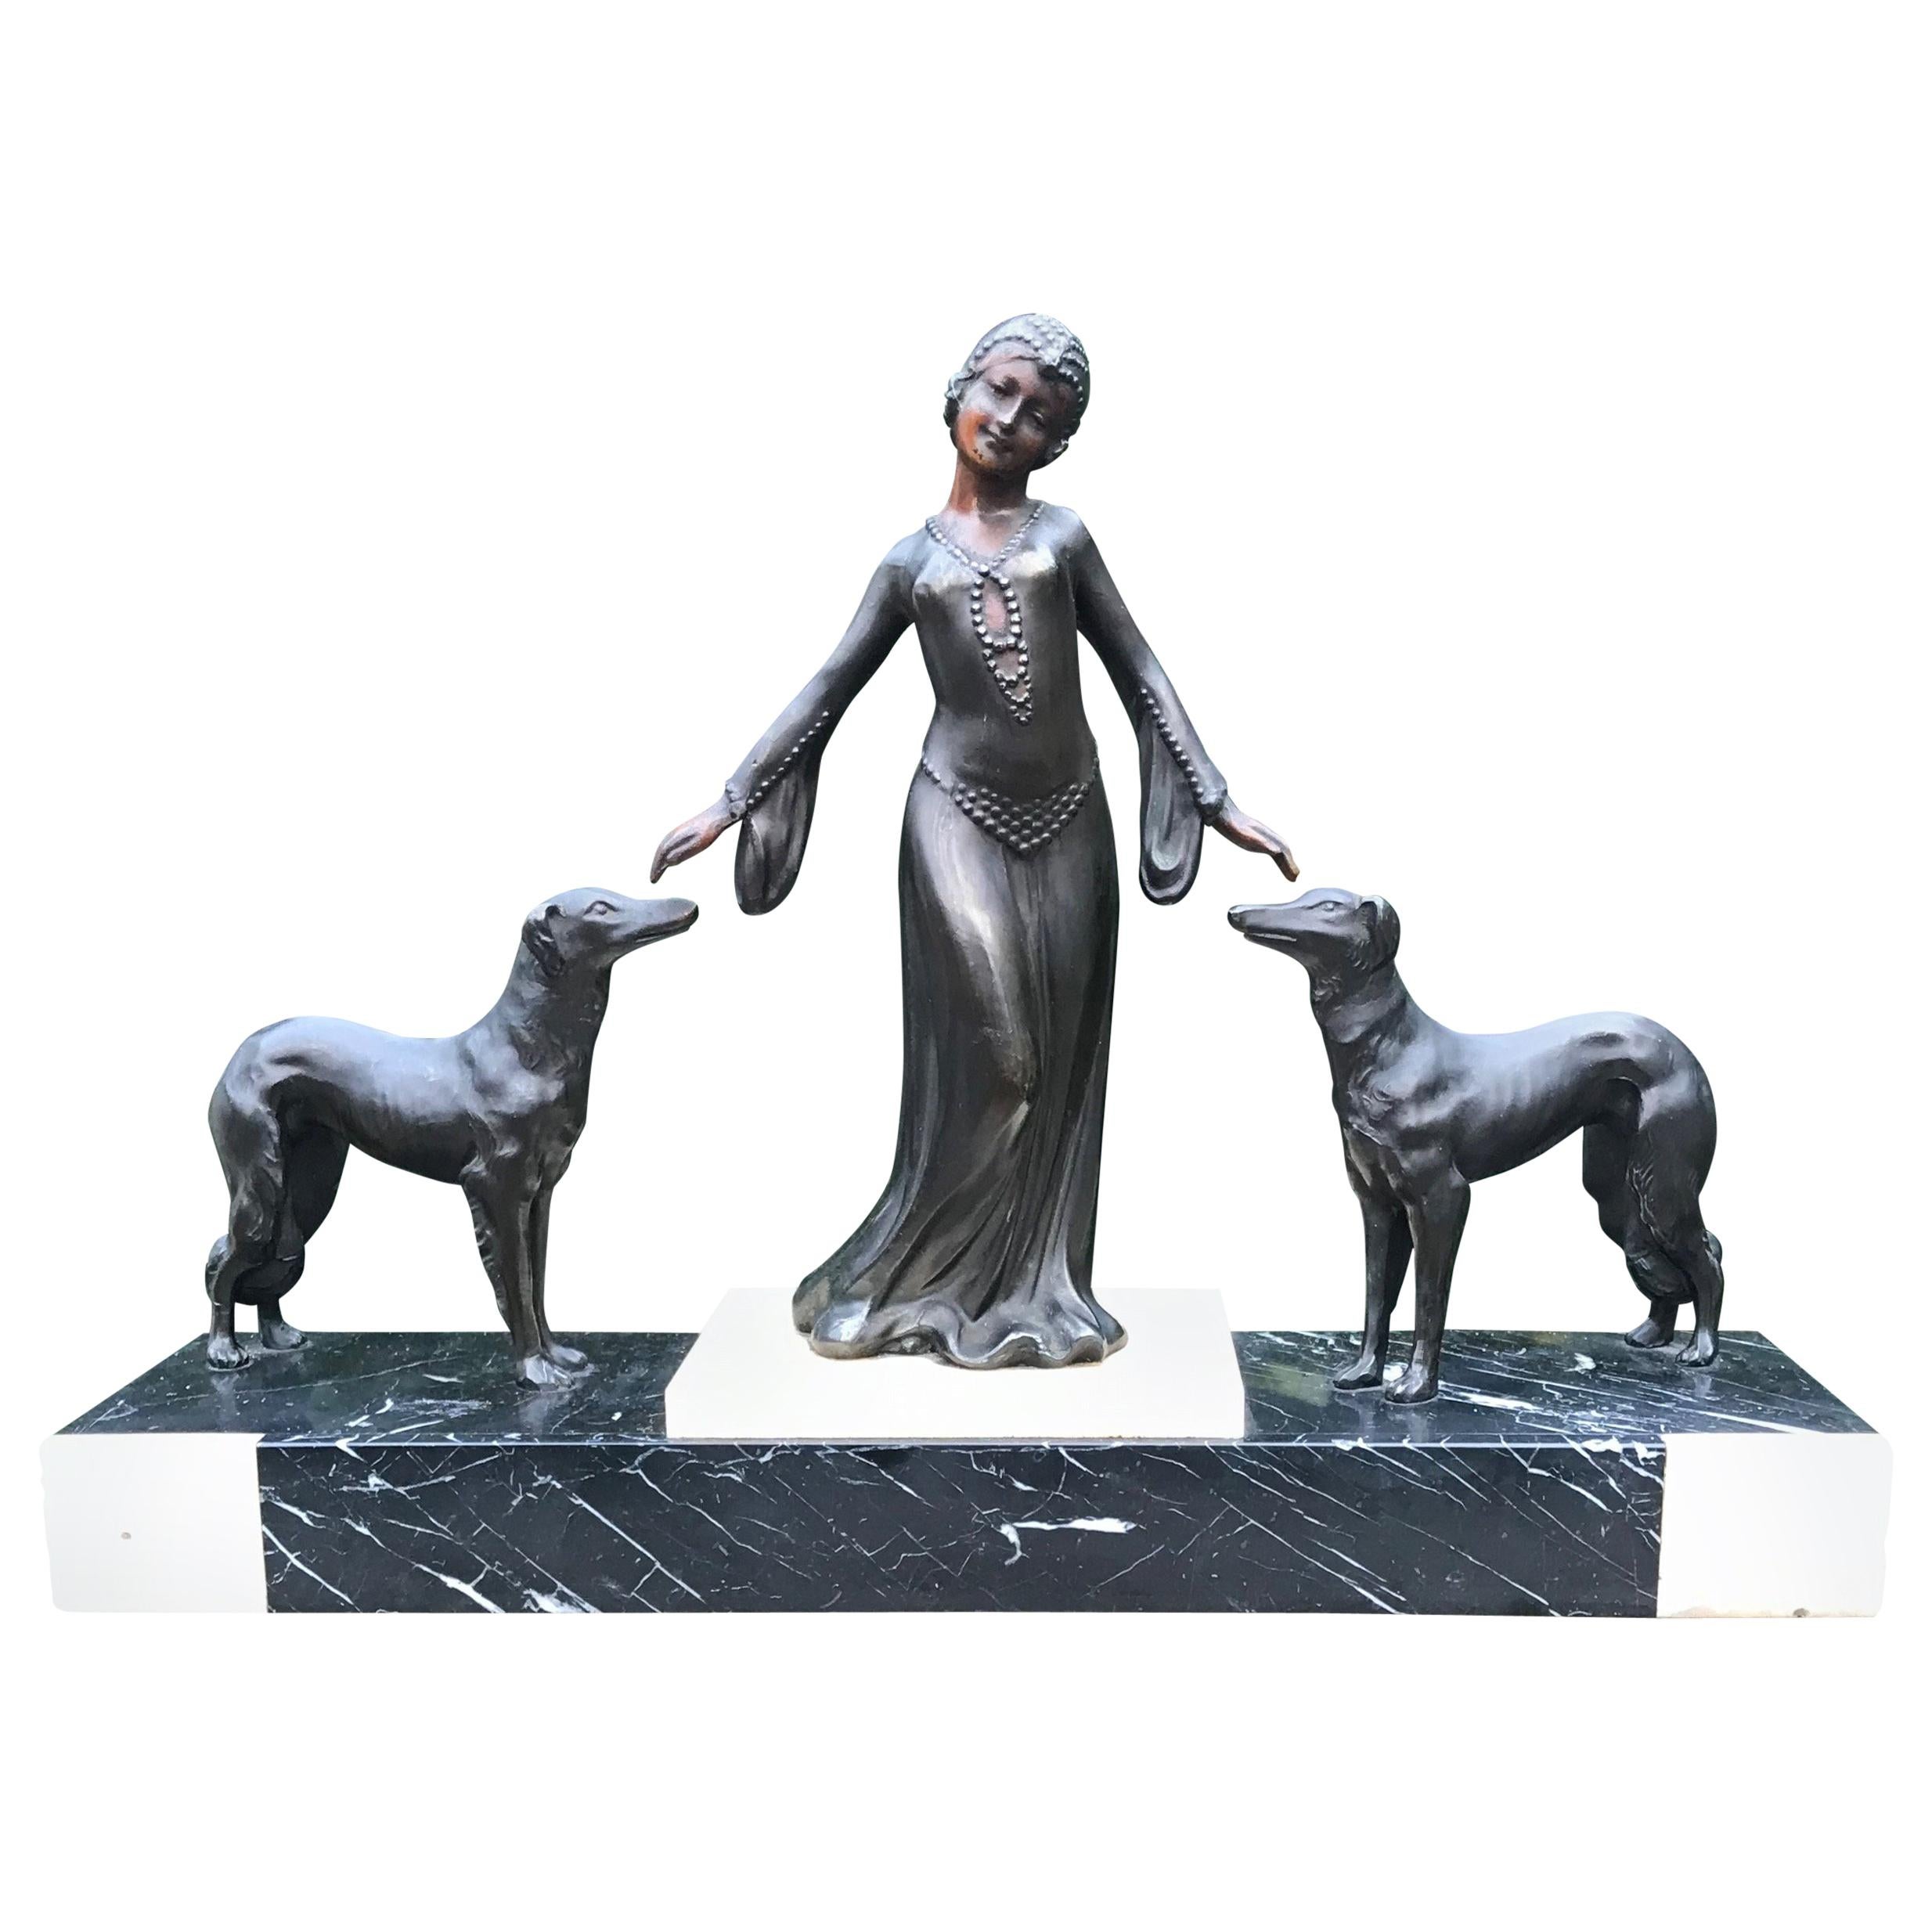 Stylish Art Deco Lady in Dress with Her Greyhounds Sculpture on a Marble Base